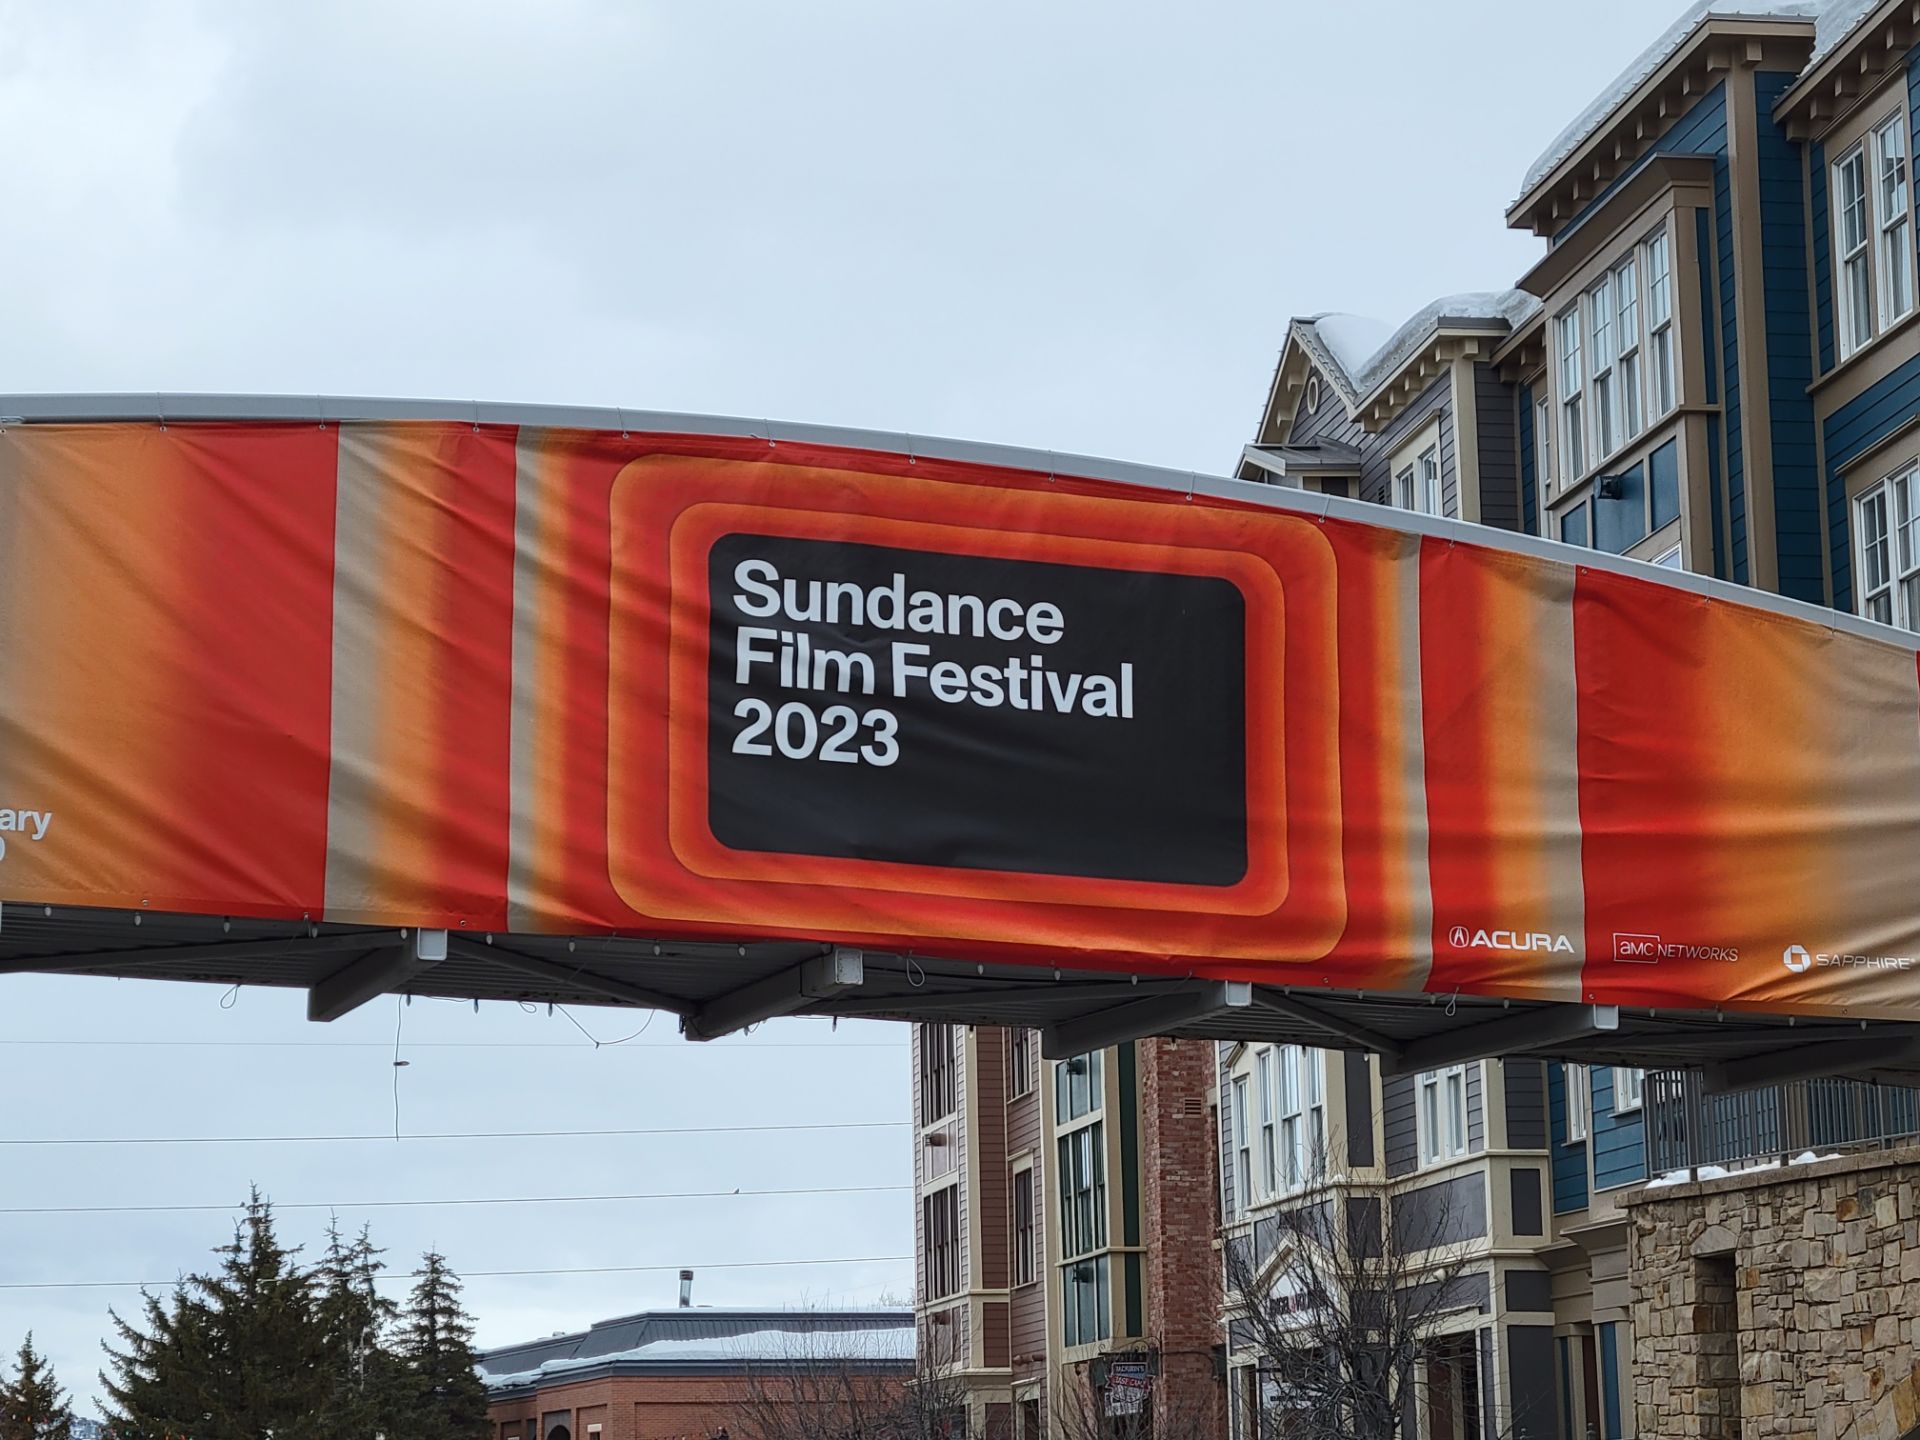 Canyons Coffee serves specialty coffee at Sundance Film Festival 2023